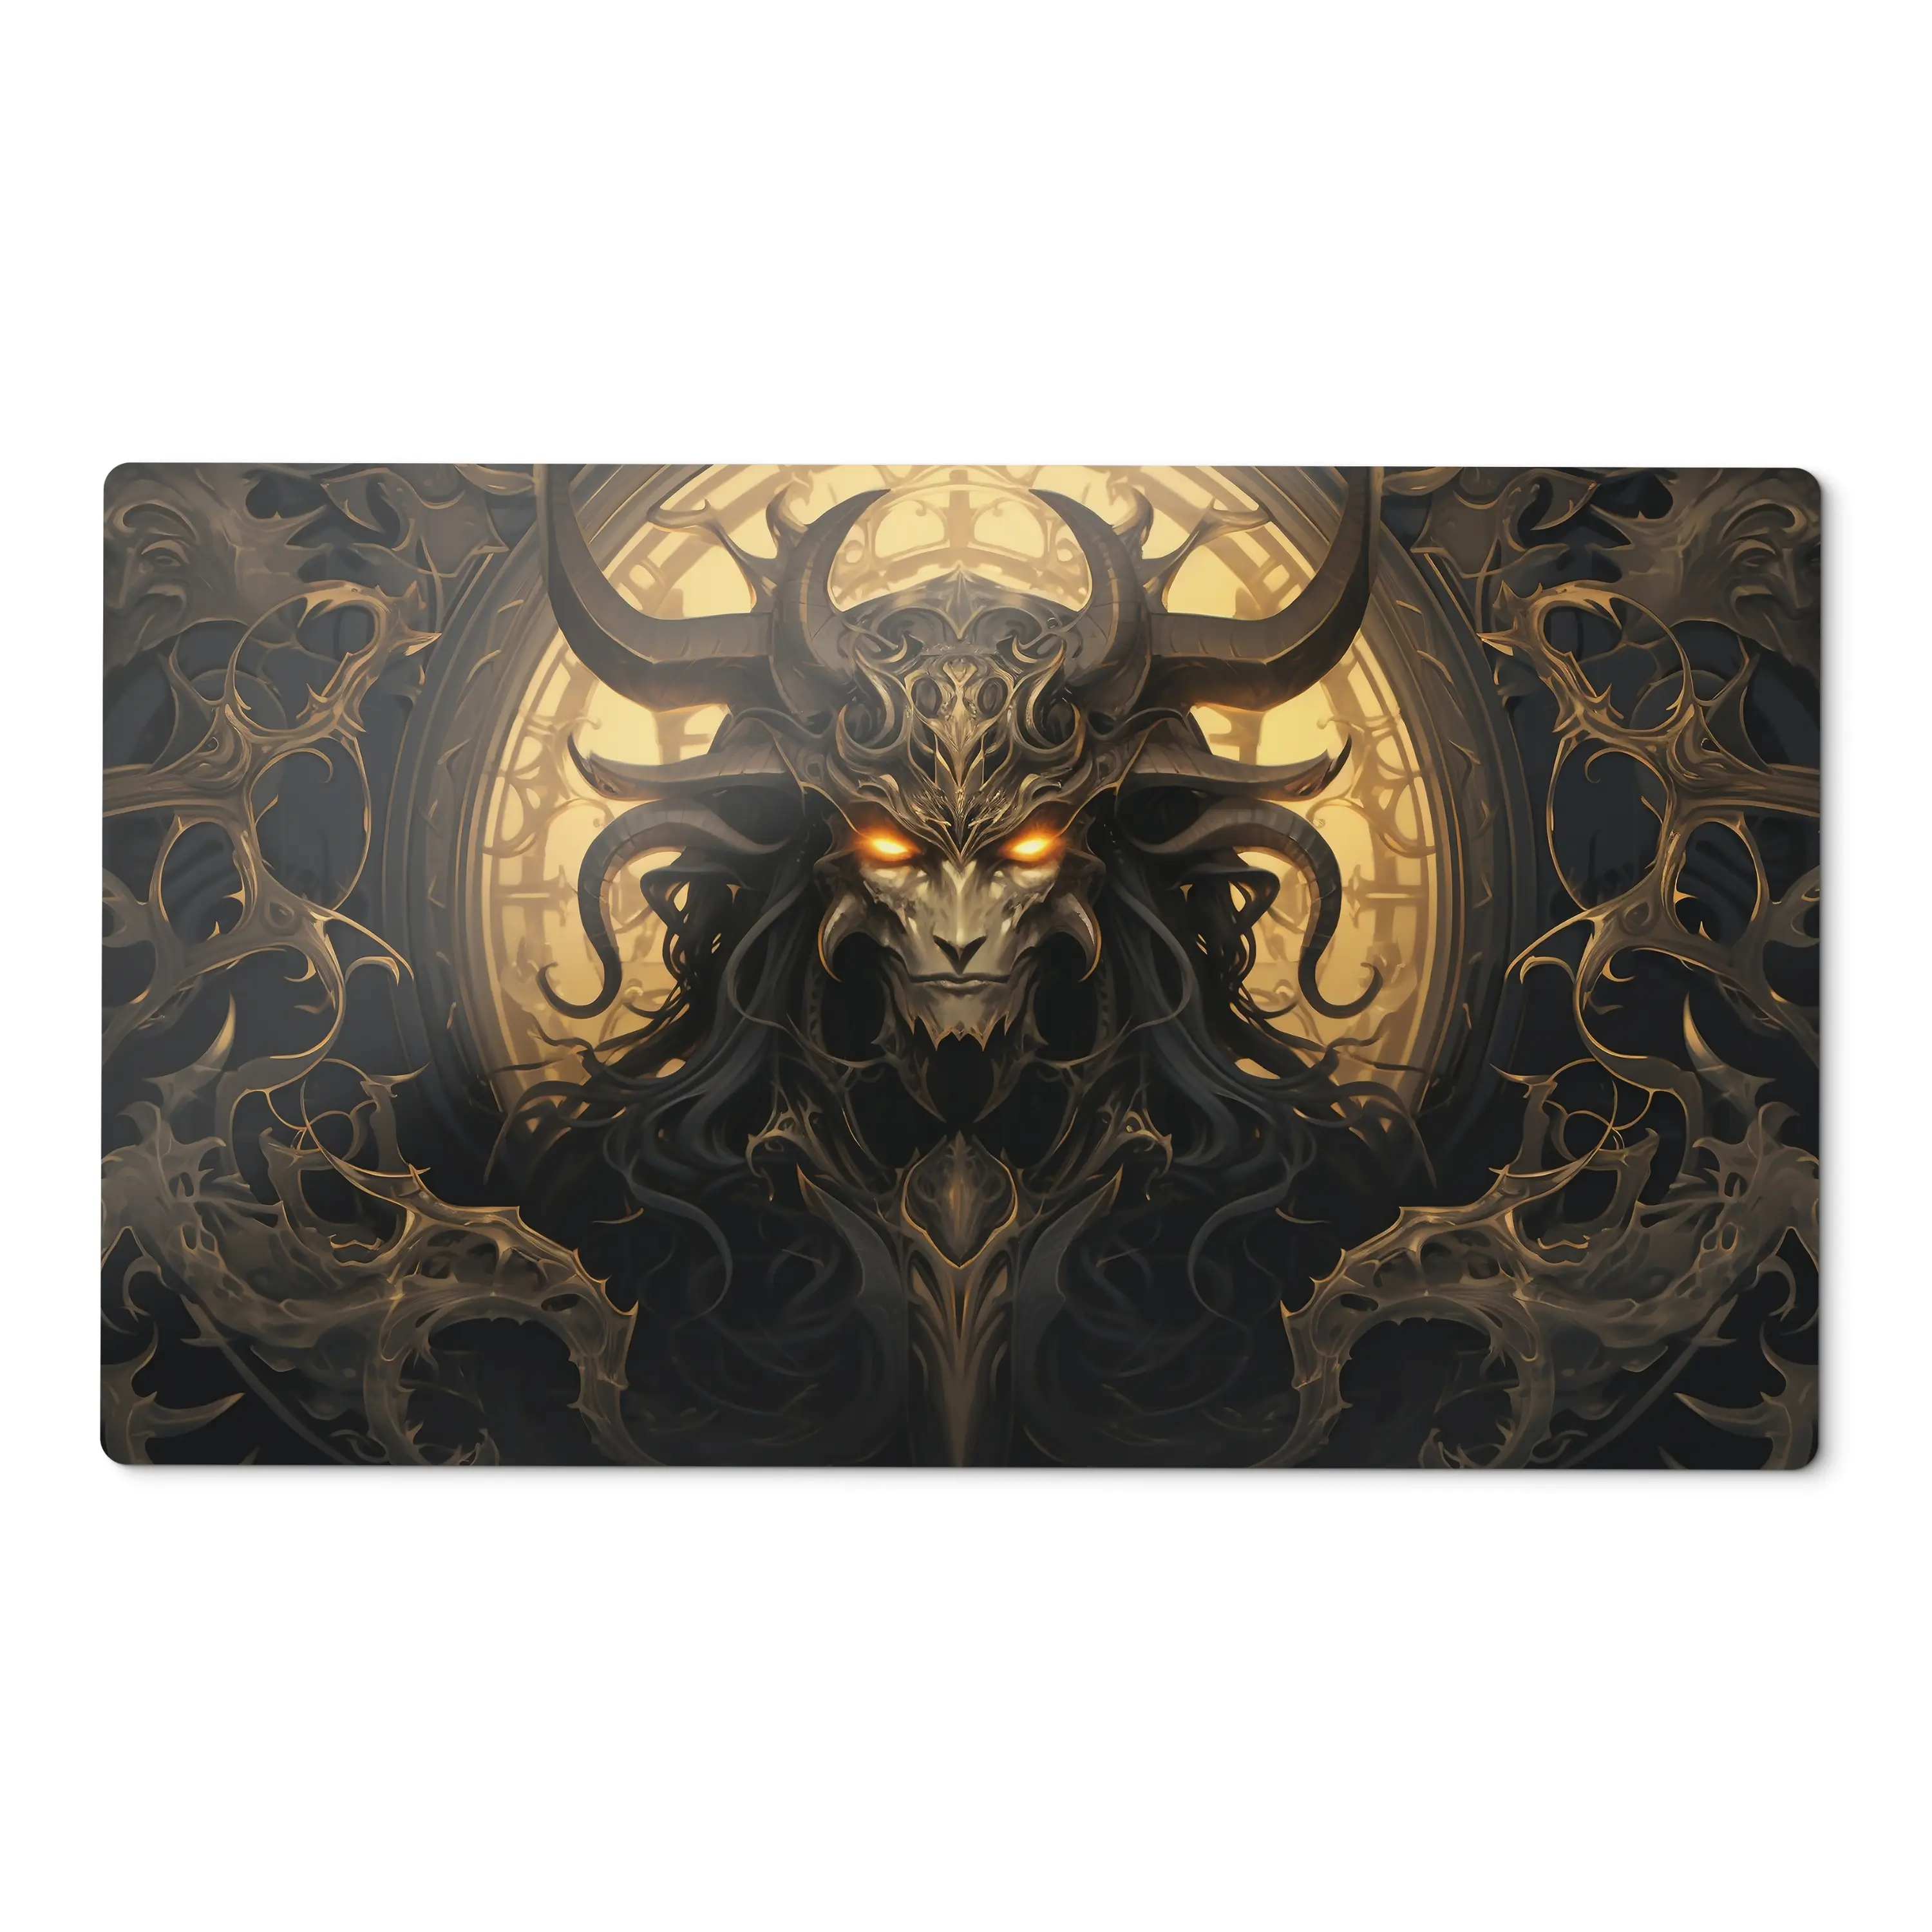 Protect Your Monsters Playmat: Throne of Shadows